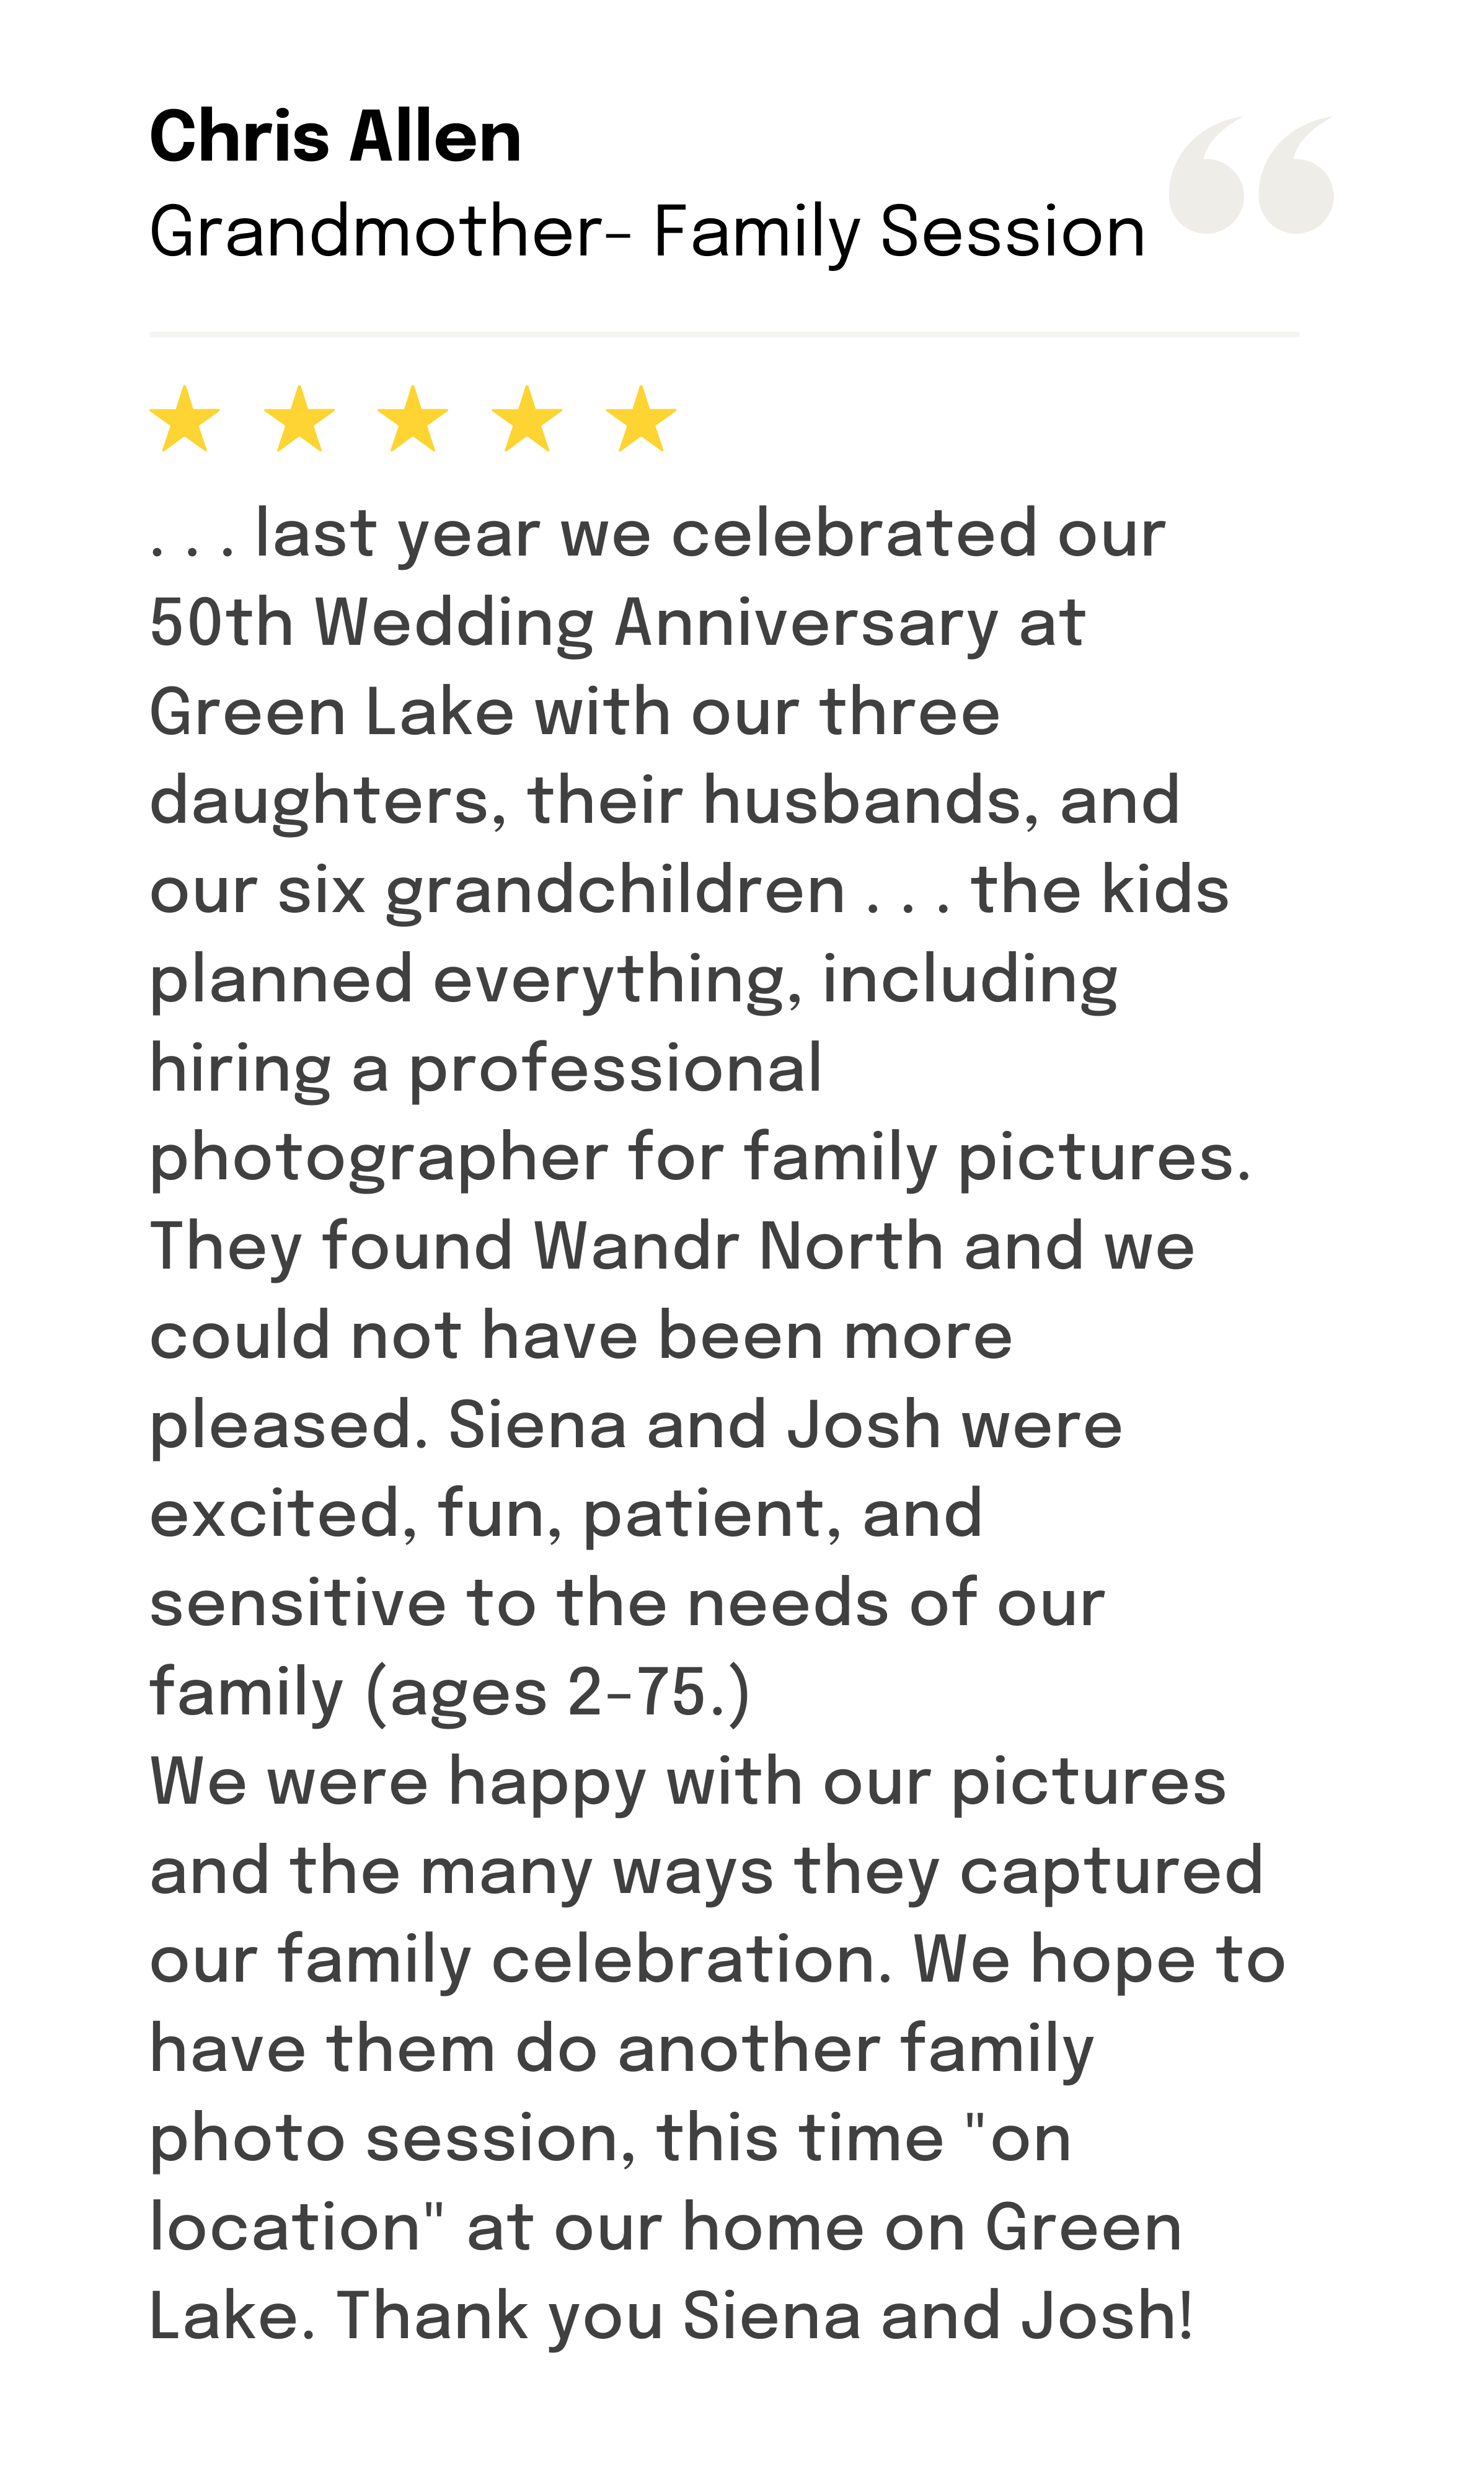 Chris writes a 5-star review to Wandr North for their family photography services.